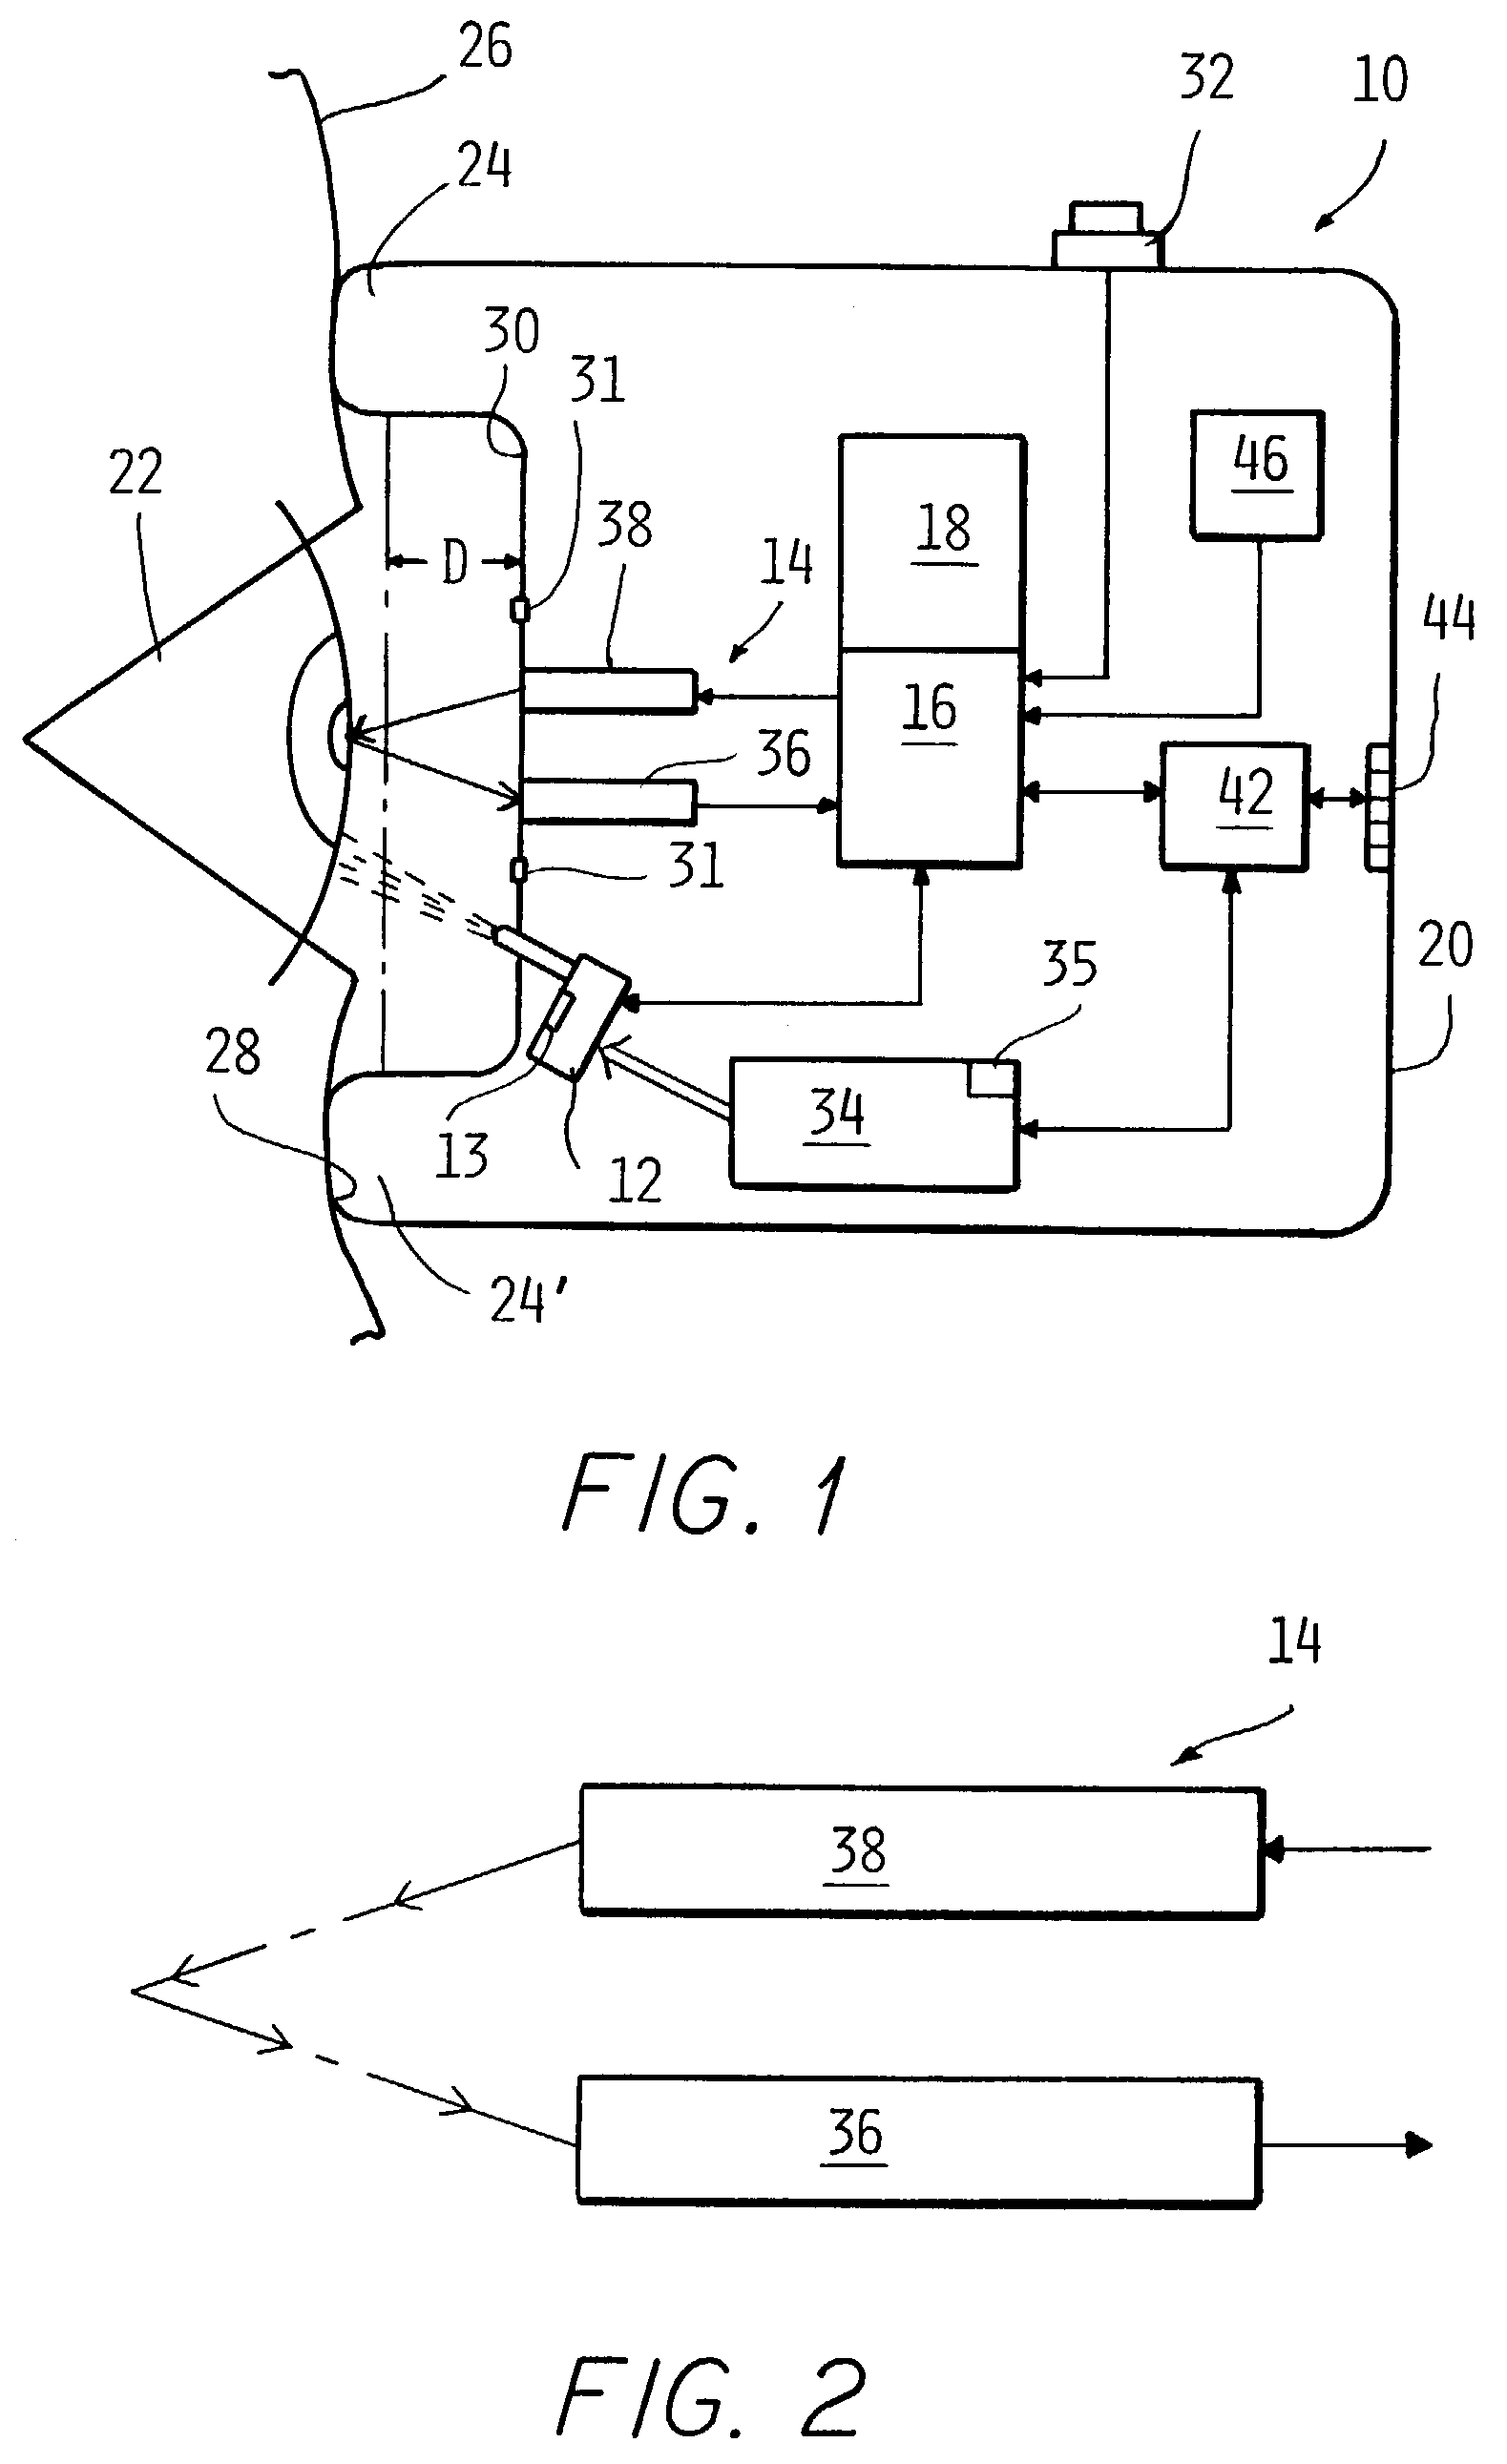 Dispensing method and device for delivering material to an eye